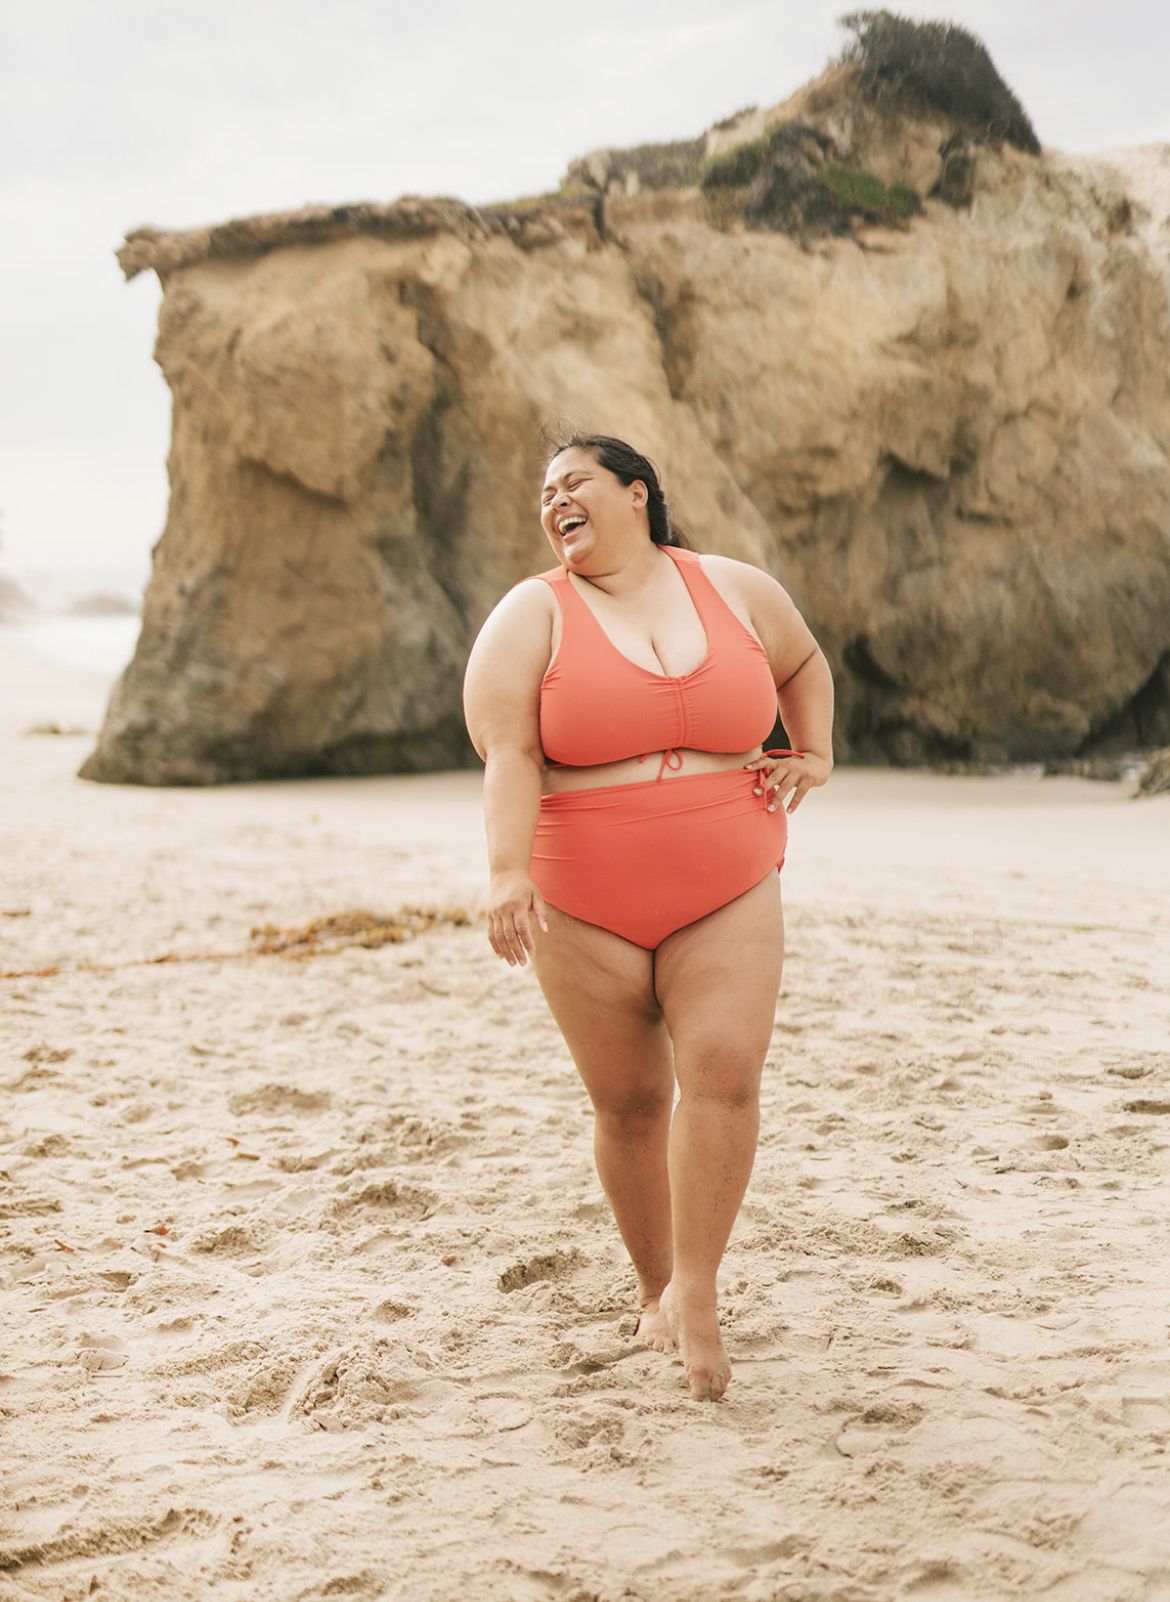 I Became A Bikini And Lingerie Model When I Was At My Highest Weight Ever HuffPost HuffPost Personal pic